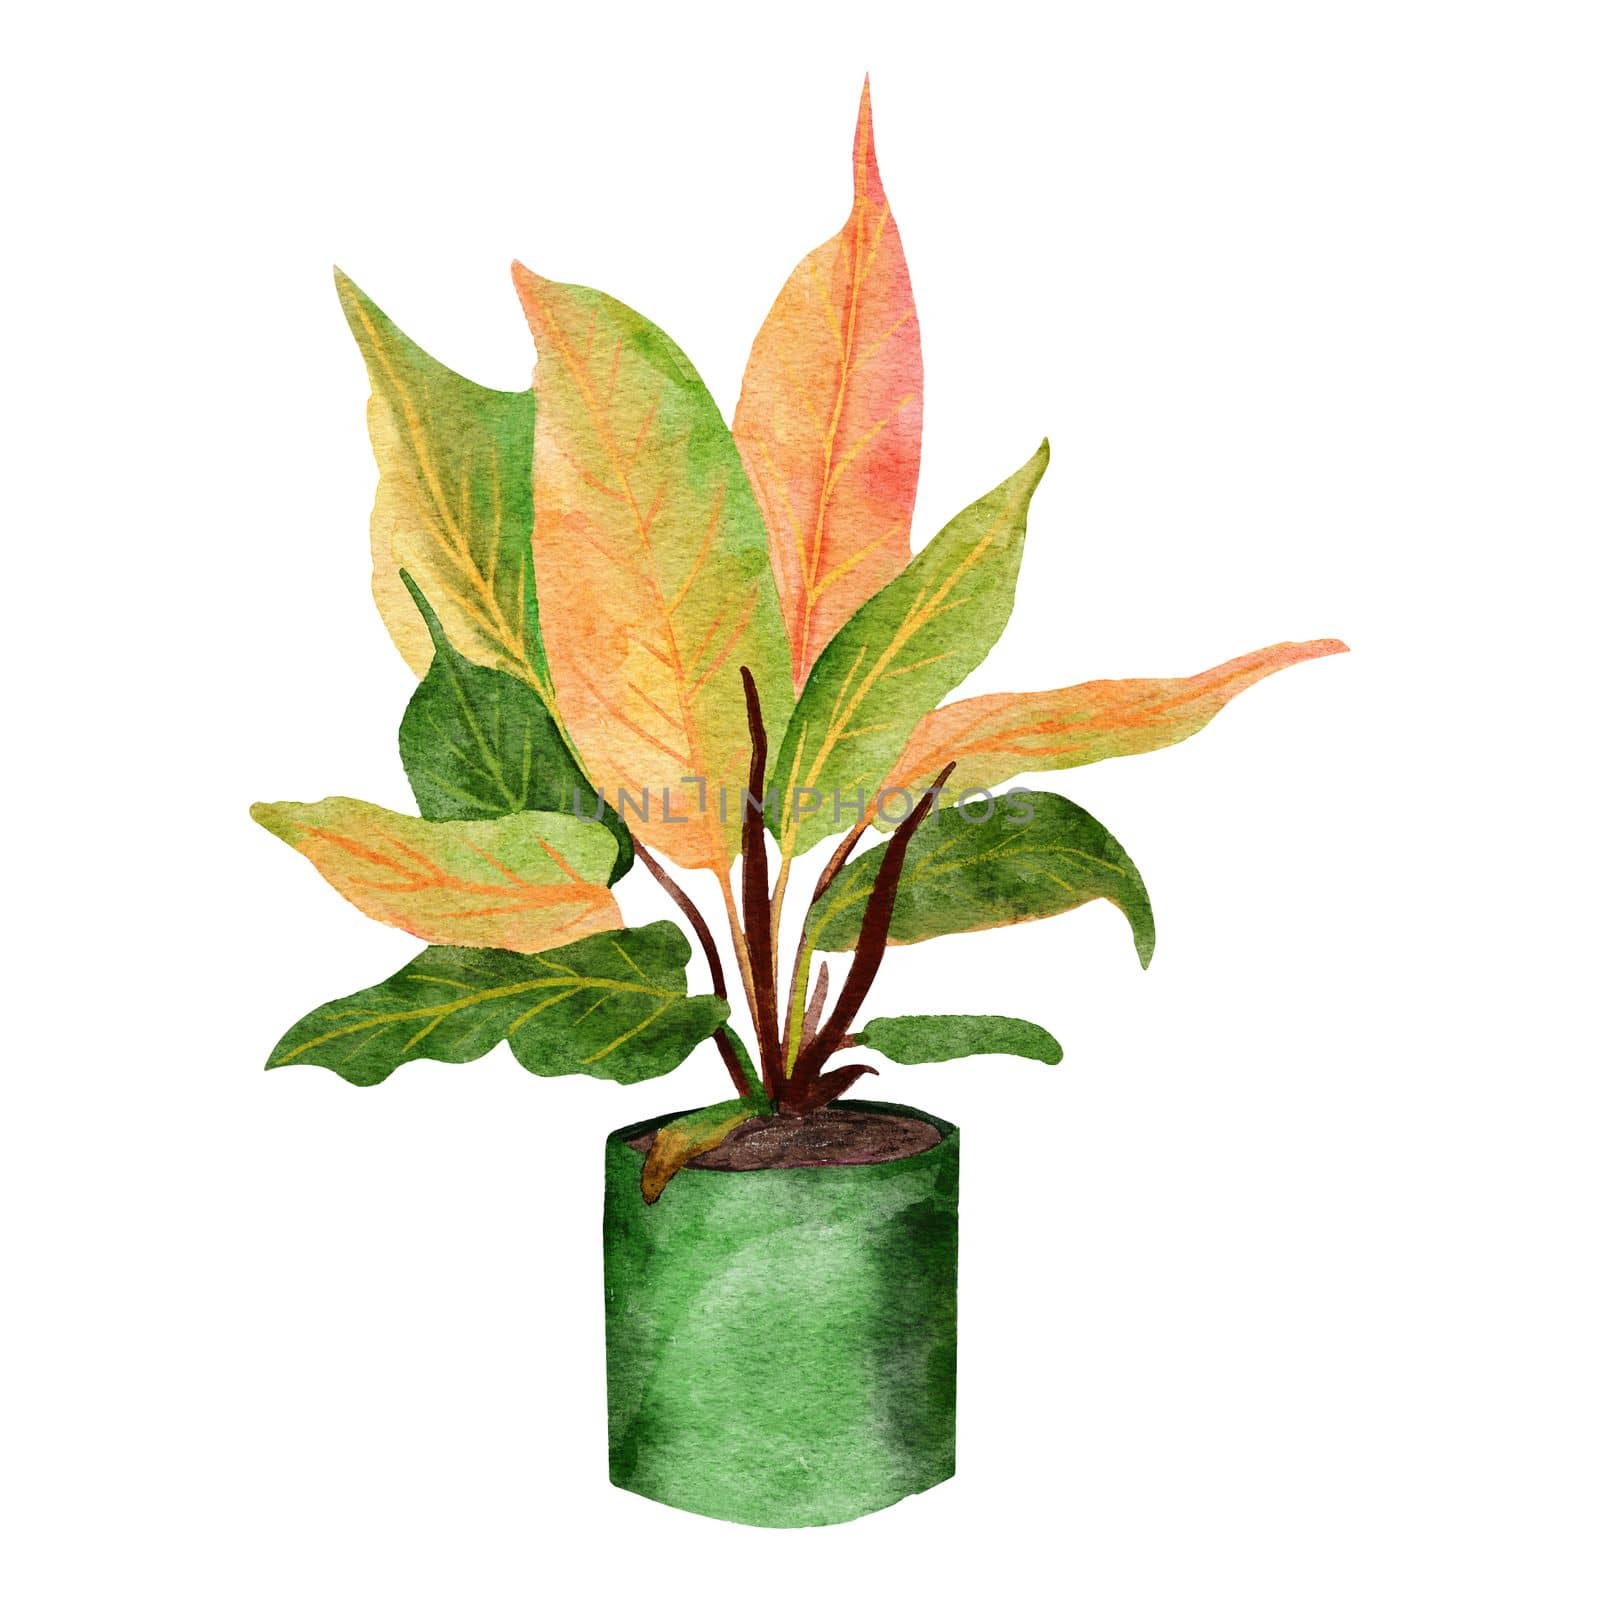 Hand drawn watercolor illustration of philodendron prince of orange houseplant, green leaves pastel pot plant flower, tropical foliage leaves, expensive variety. Urban jungle nature lovers species herb.